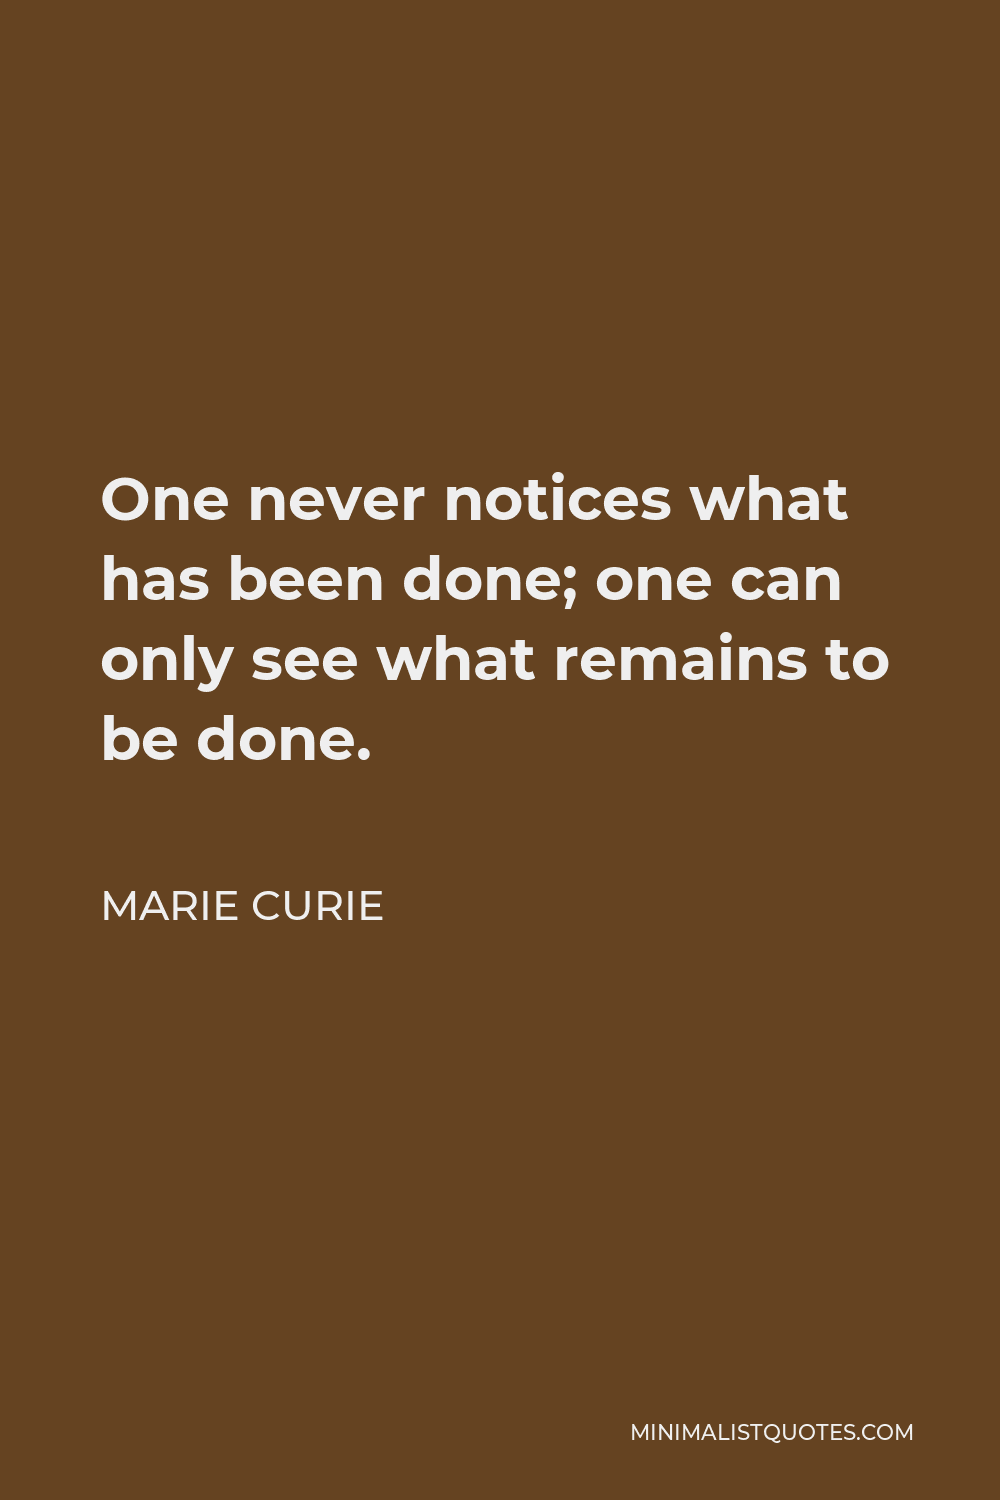 Marie Curie Quote - One never notices what has been done; one can only see what remains to be done.